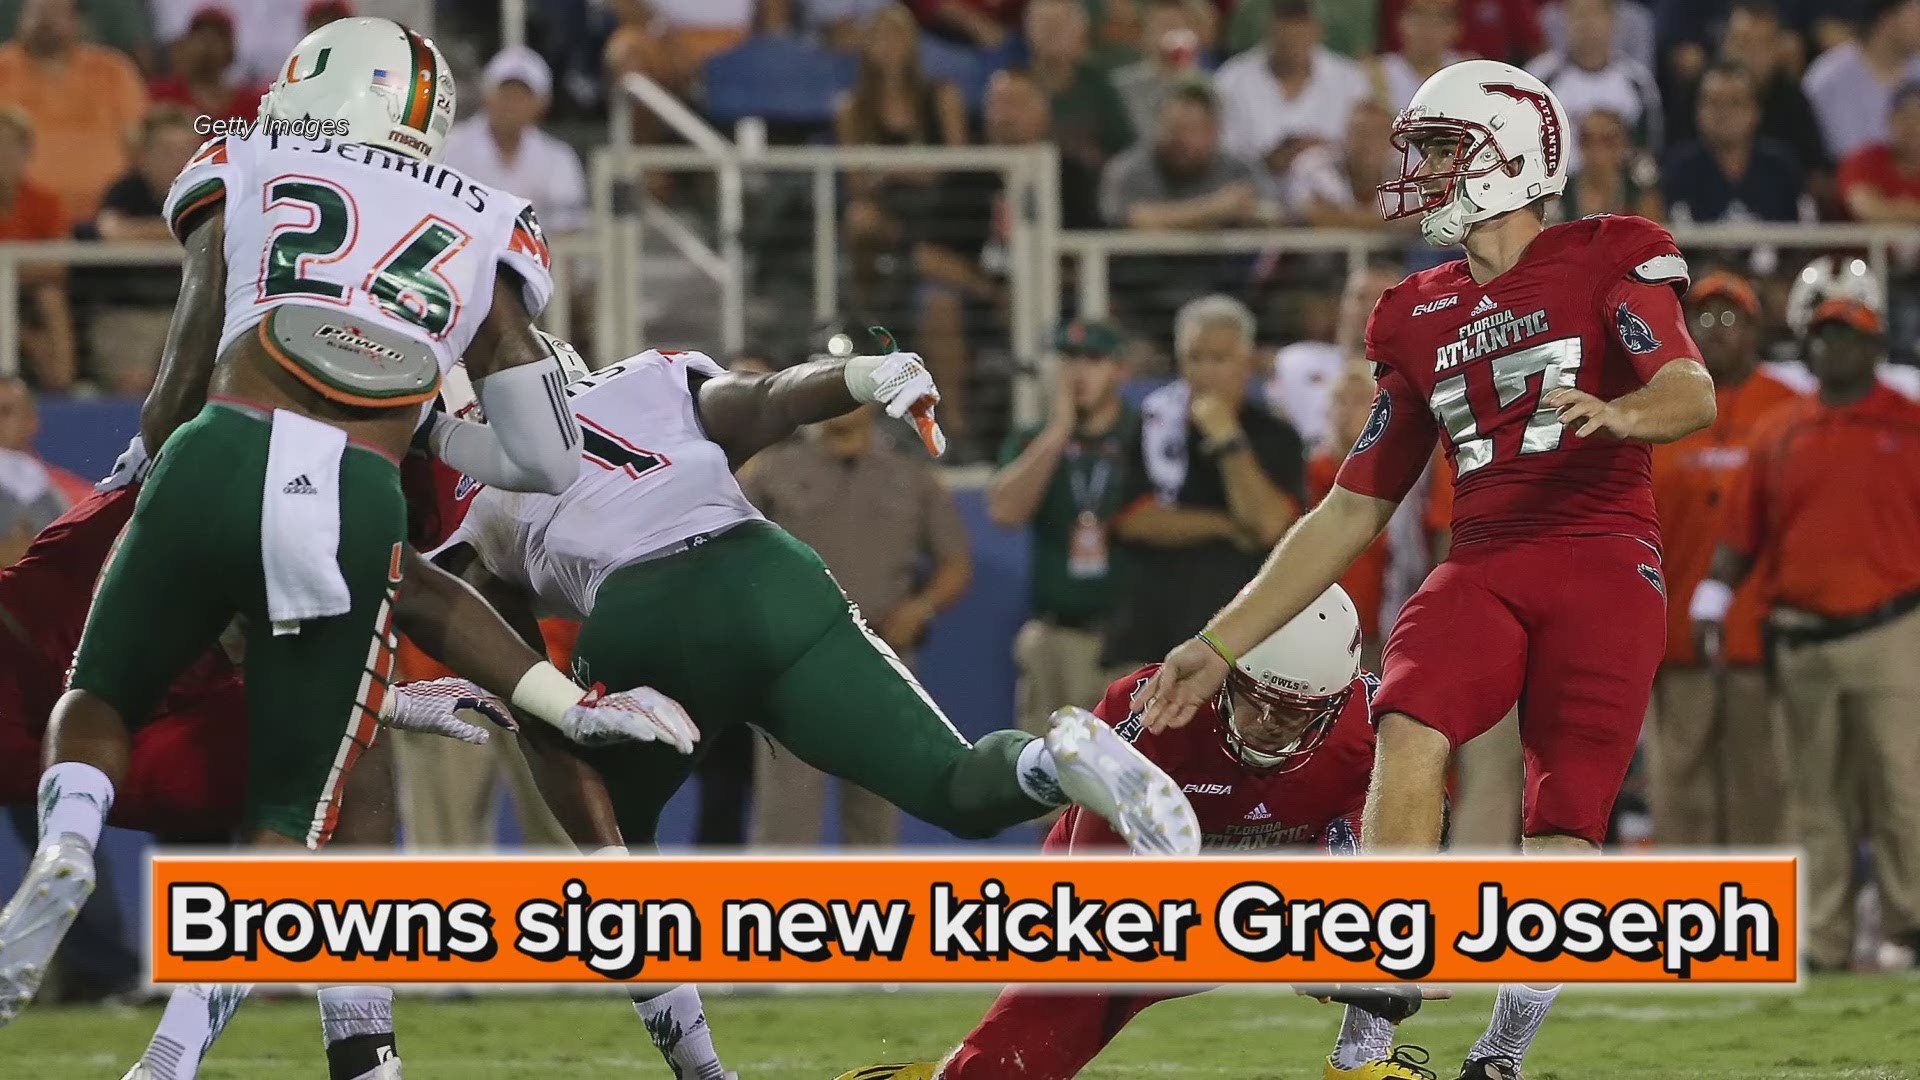 REPORT: Cleveland Browns to sign rookie kicker Greg Joseph